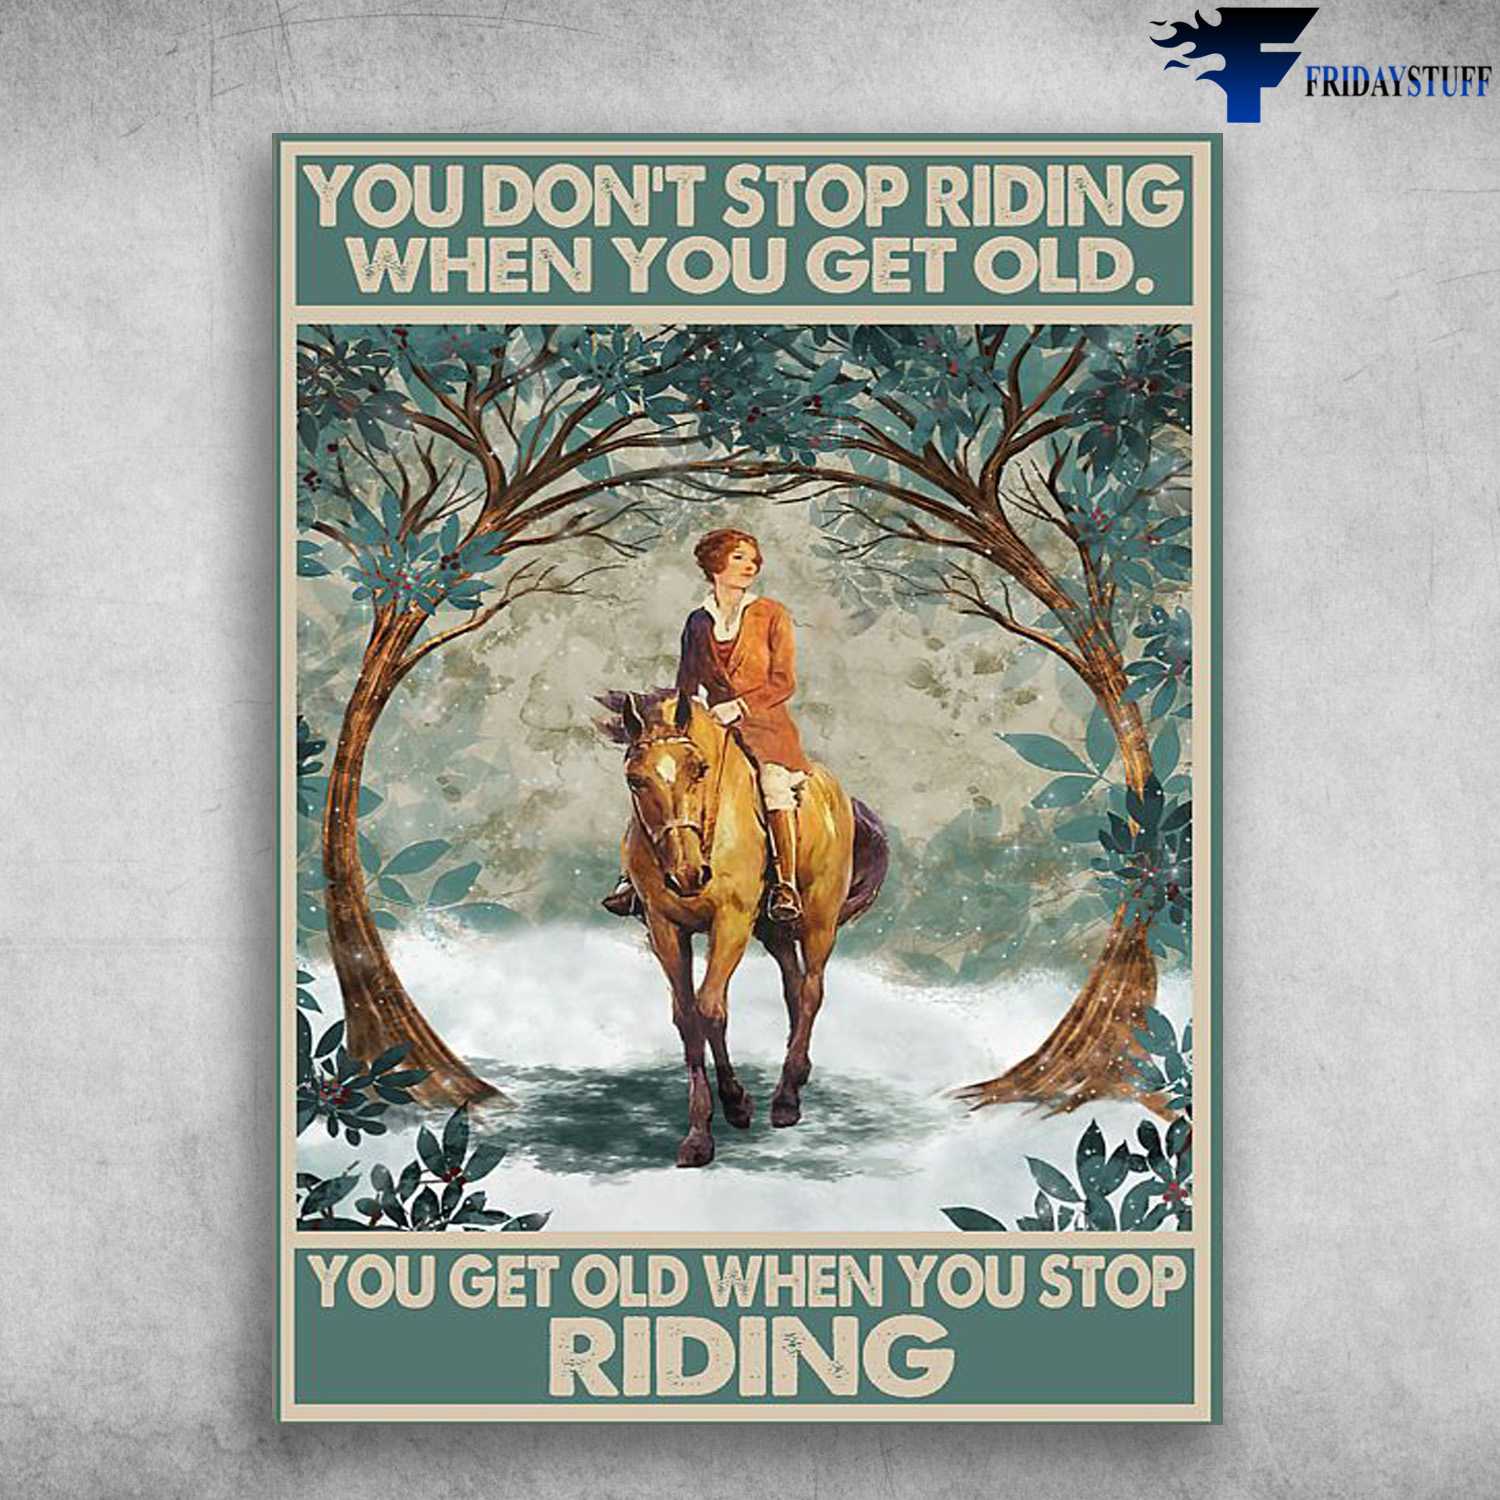 Lady Riding Horse, Horse Lover, Horse Poster, You Don't Stop Riding When You Get Old, You Get Old When You Stop Riding